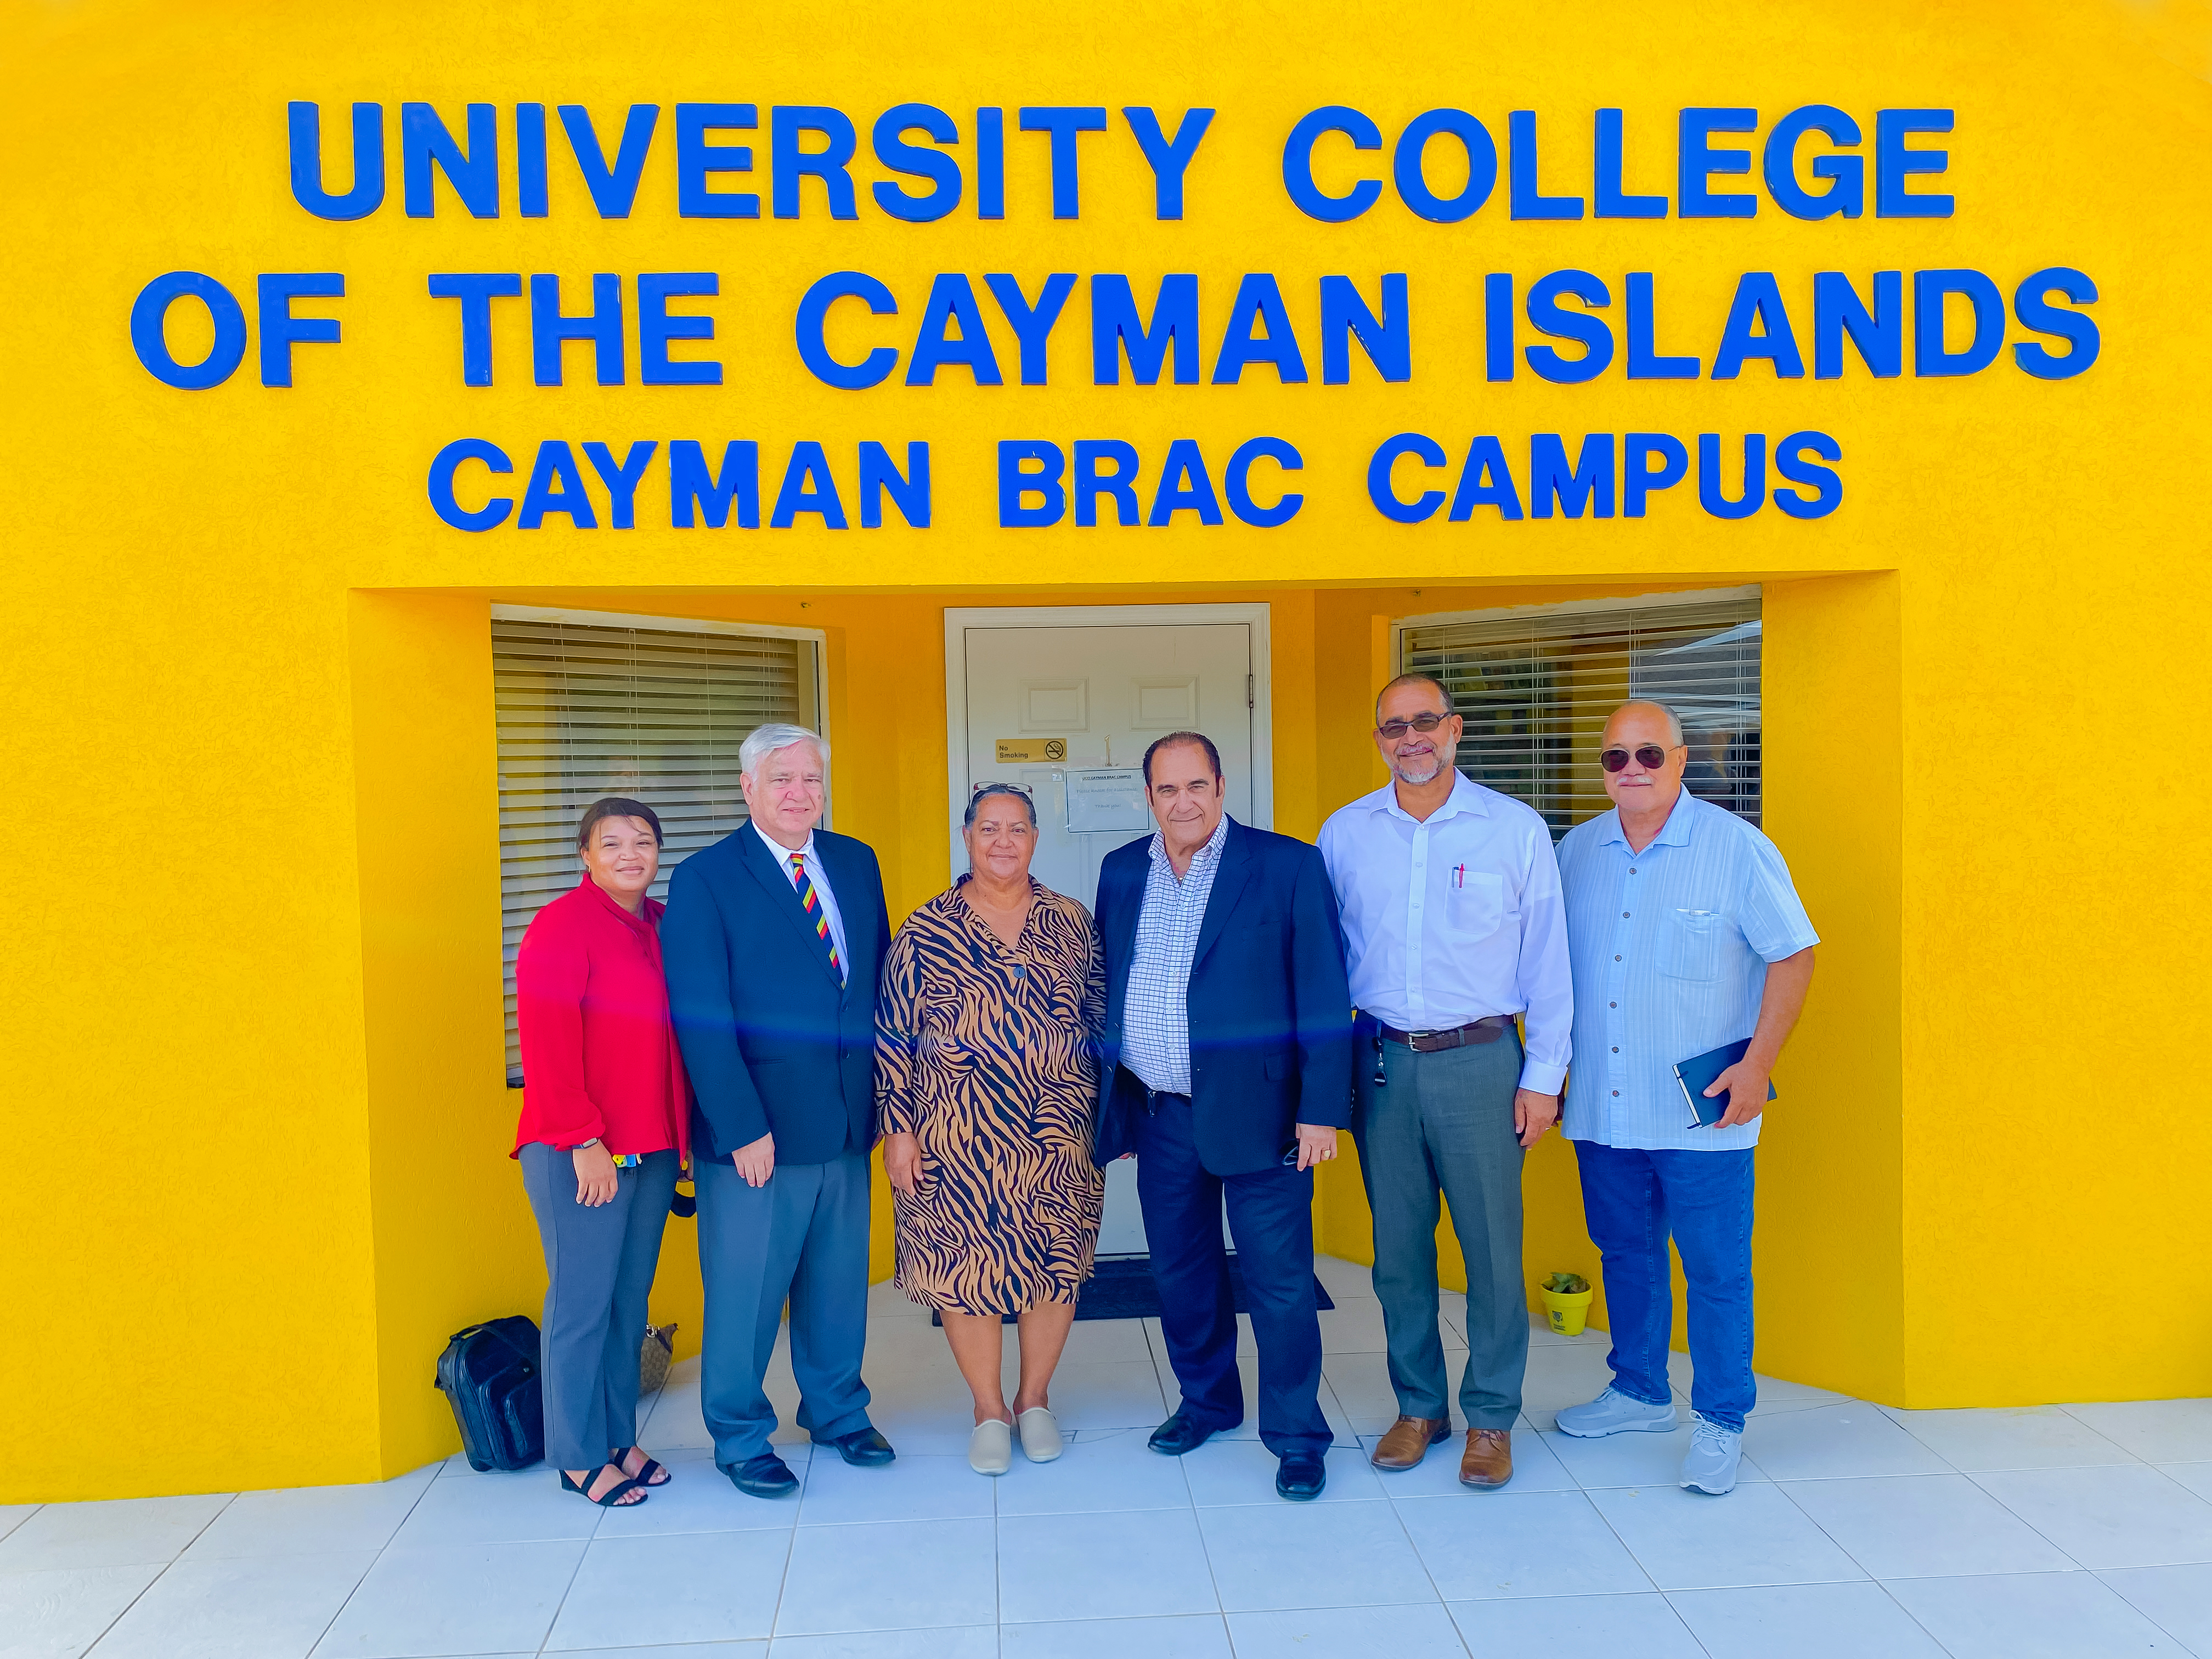 UCCI ANNOUNCES COMMITMENT TO EXPAND WITHIN THE BRAC AT PRESIDENT’S WELCOME EVENT SUPPORTED BY THE MINISTER OF EDUCATION